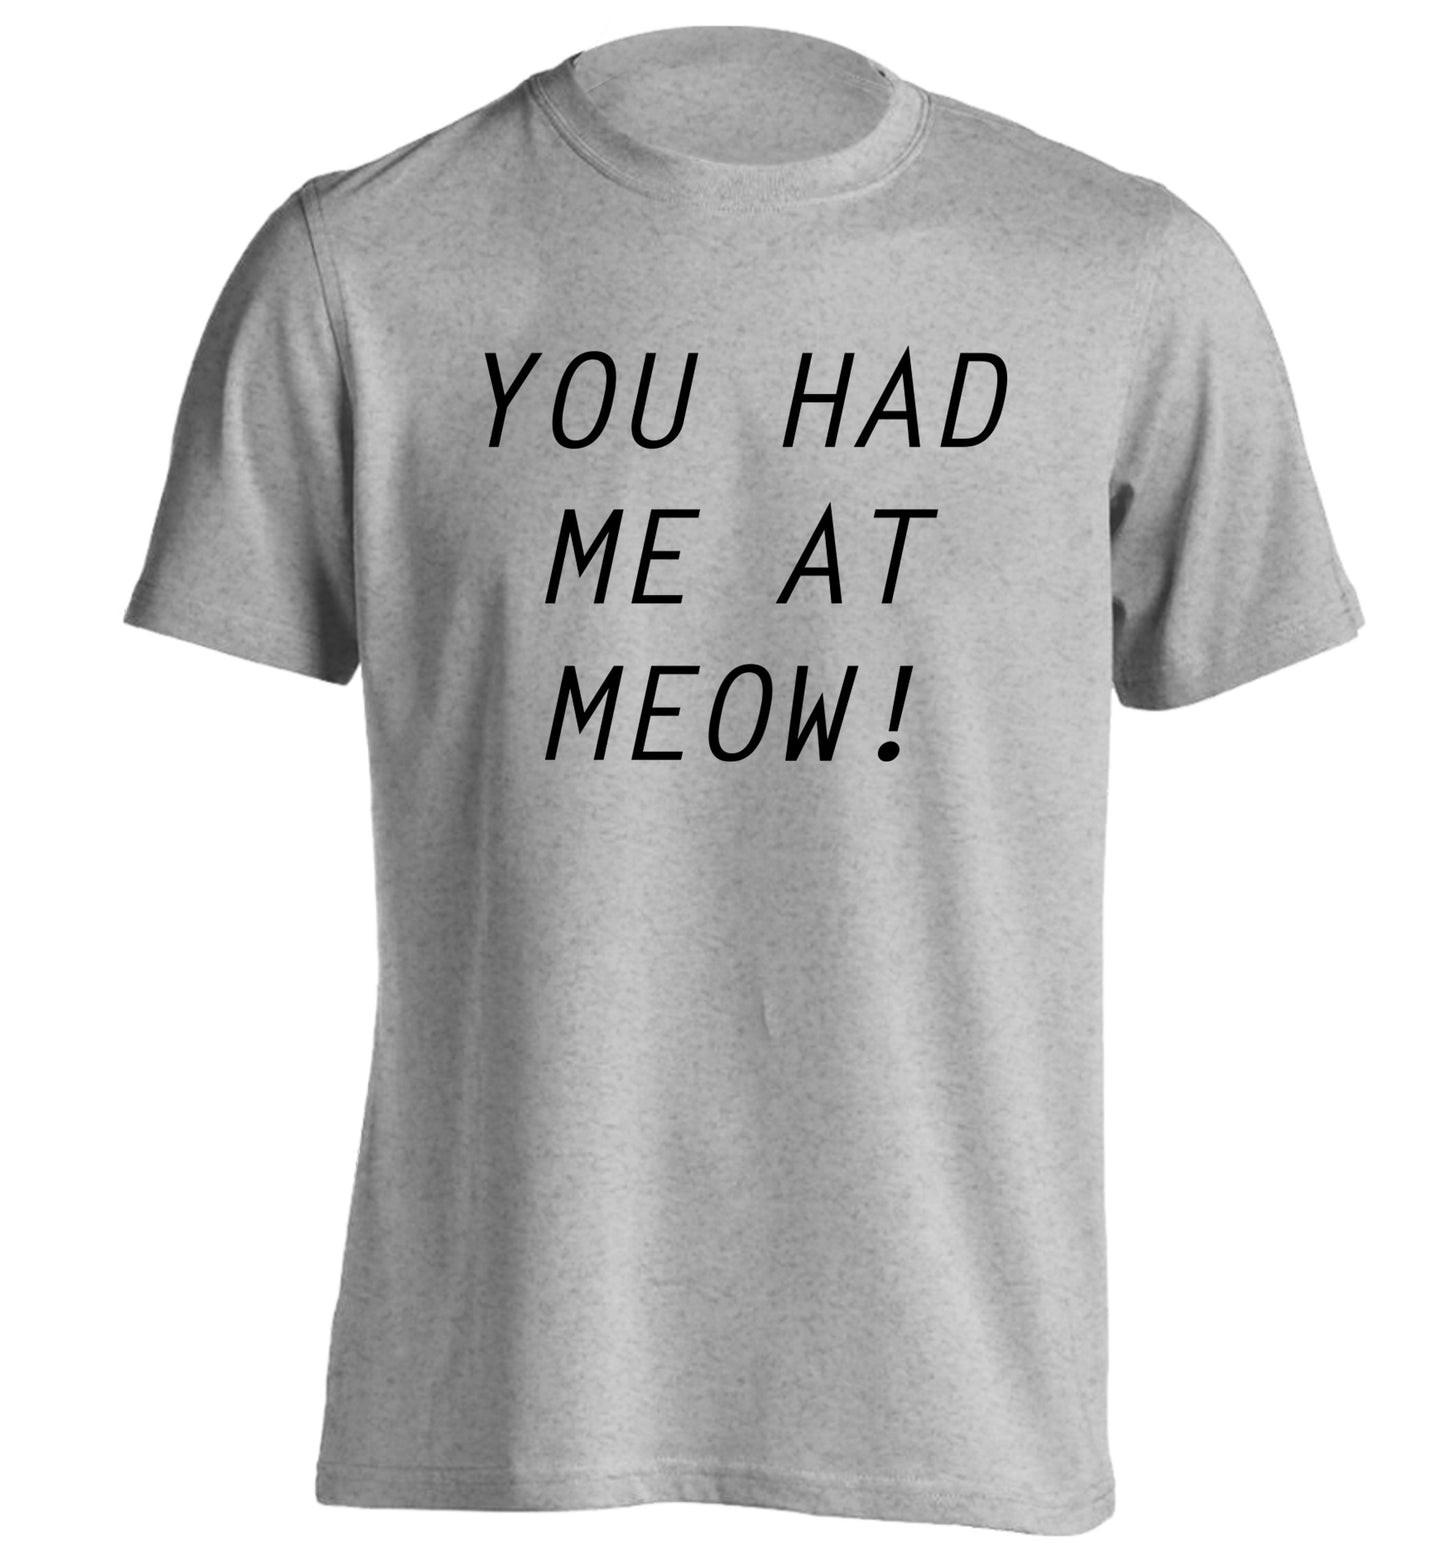 You had me at meow adults unisex grey Tshirt 2XL